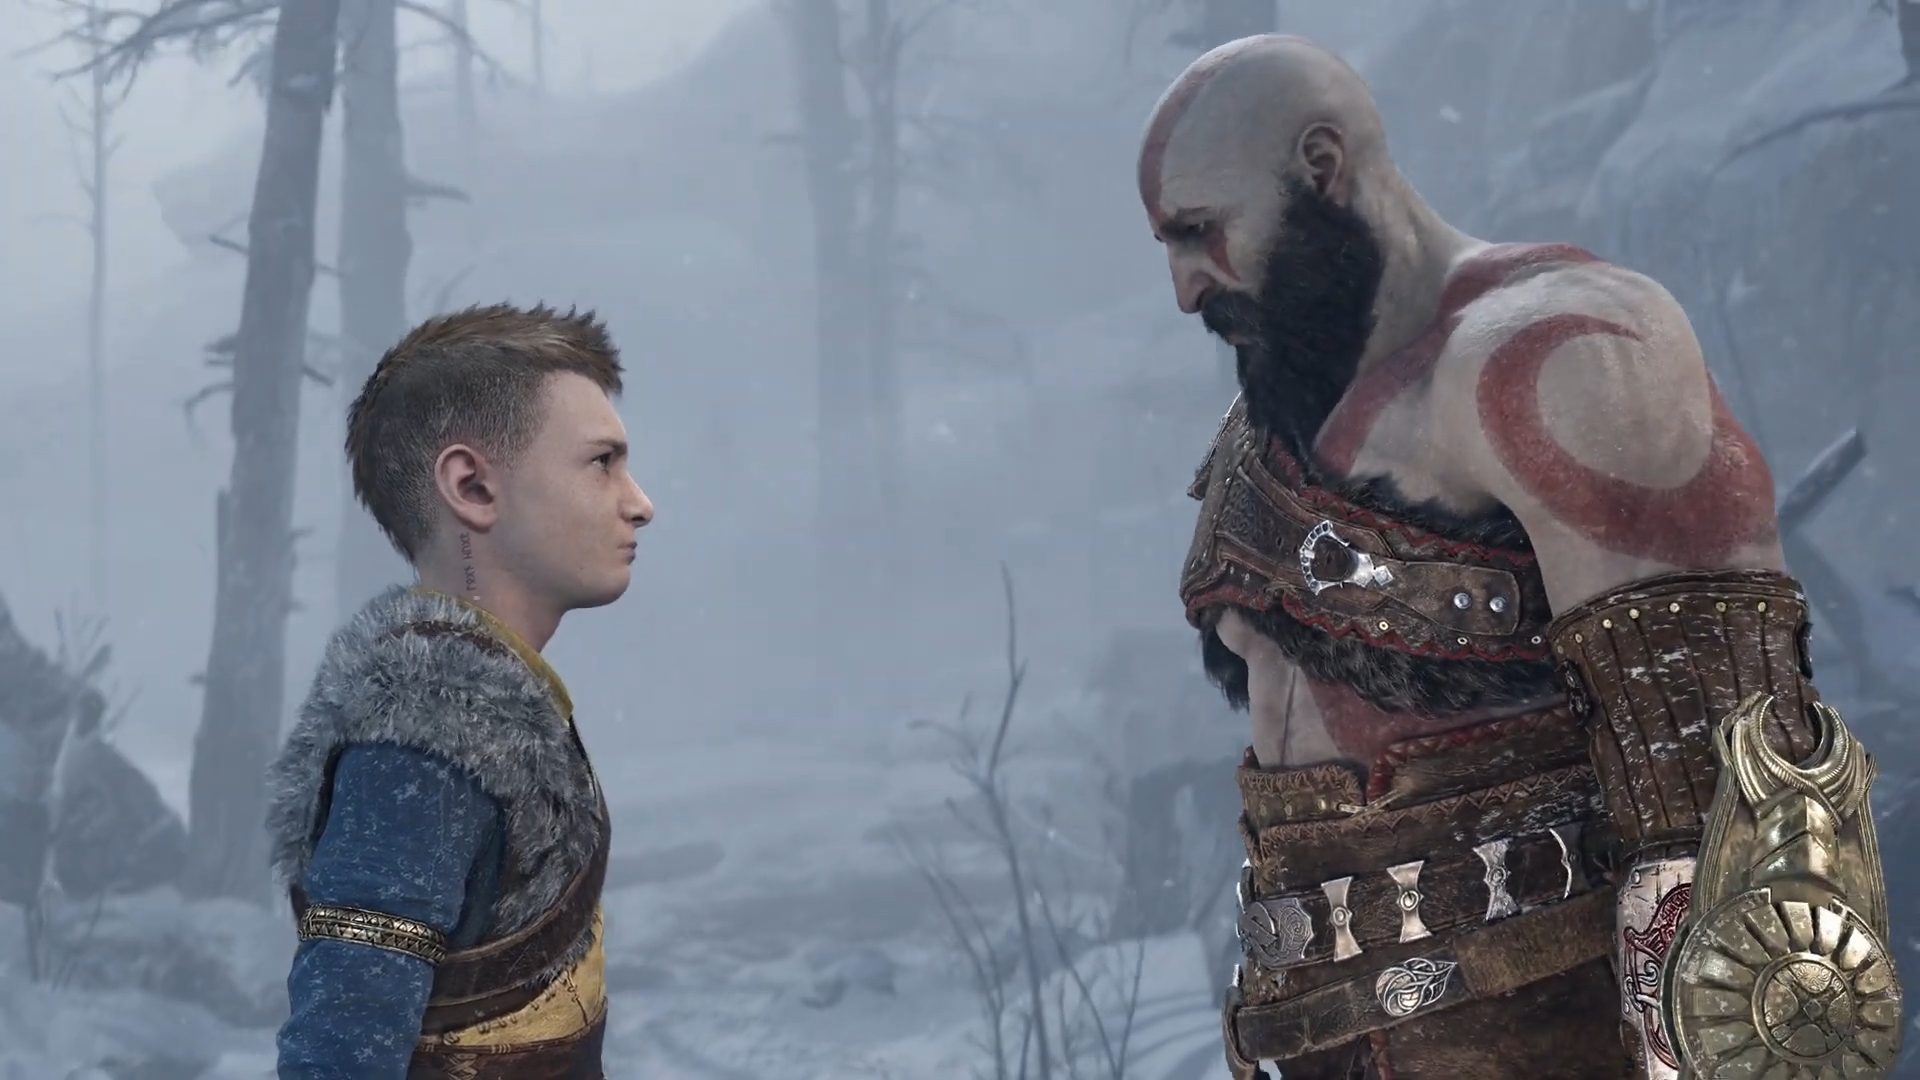 Will God of War Ragnarök Be The Next Sony Exclusive To Get A PC Port?